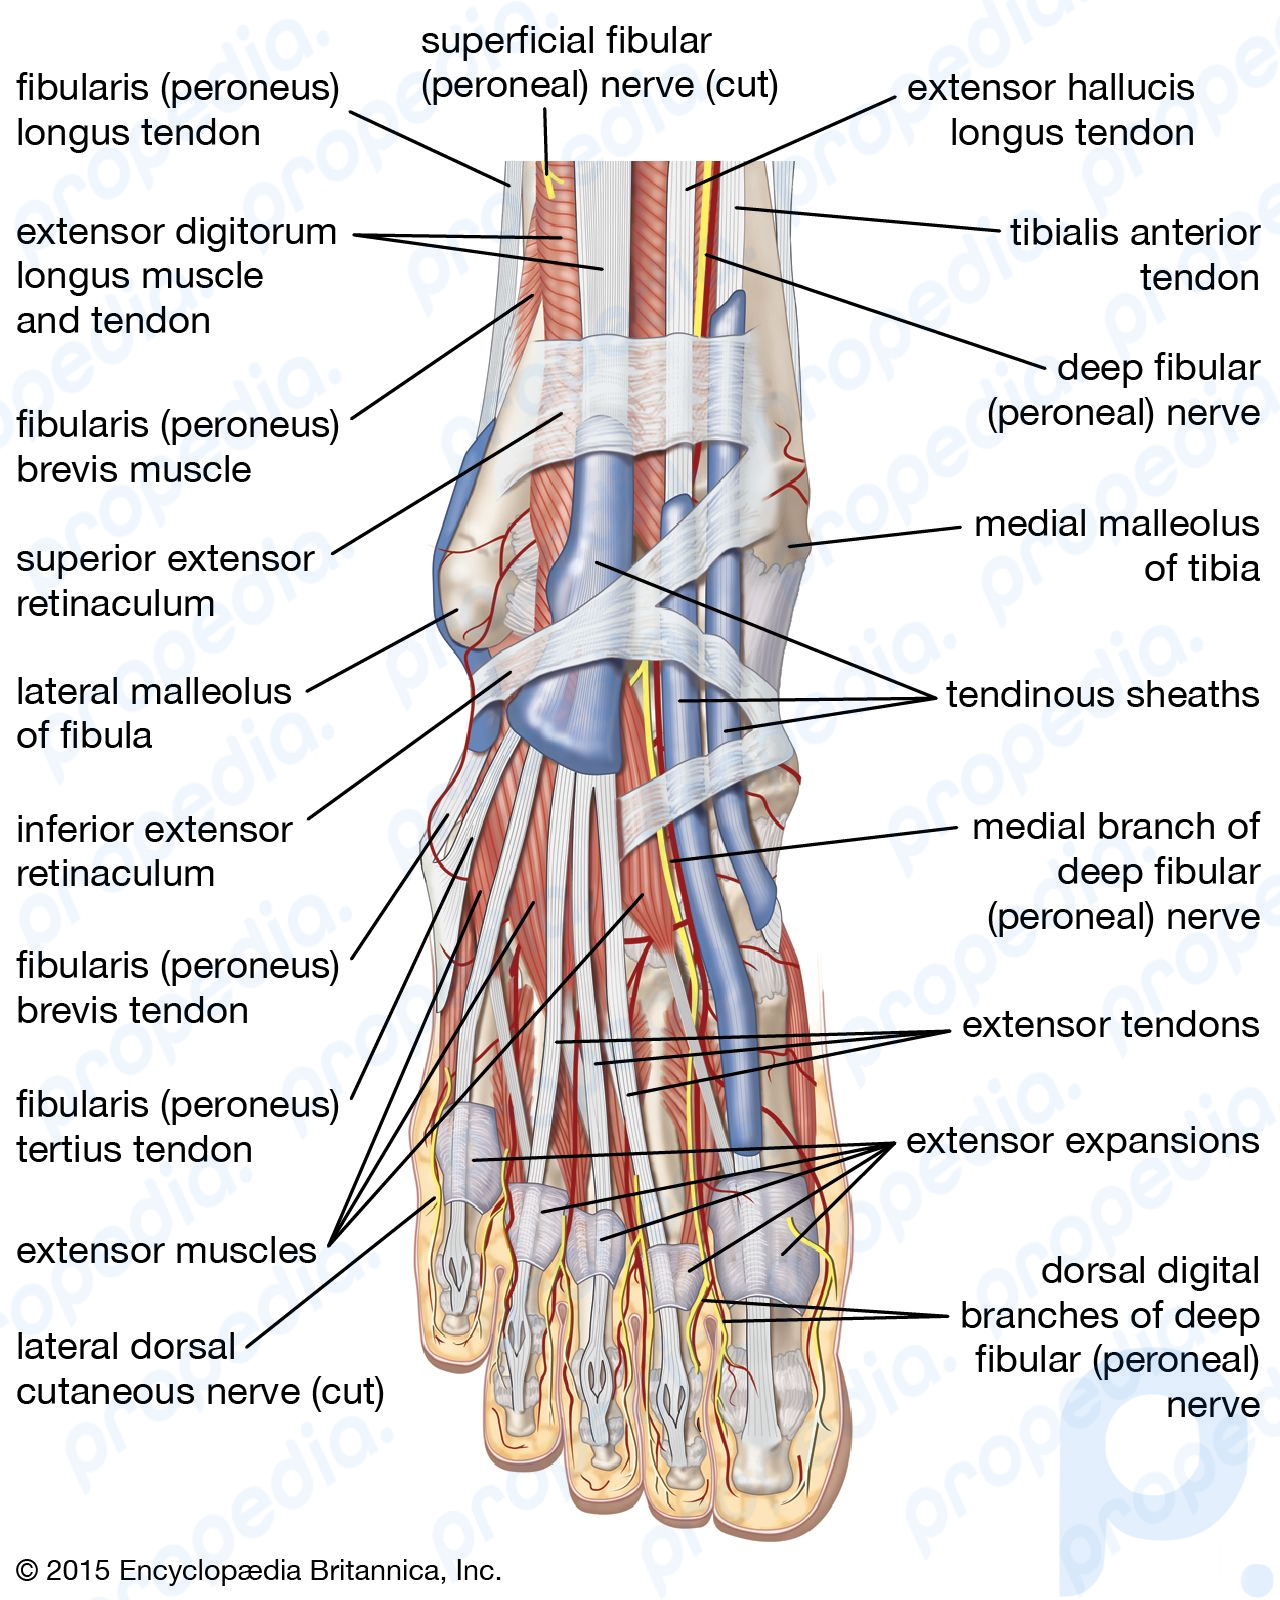 muscles, tendons, and nerves of the human foot